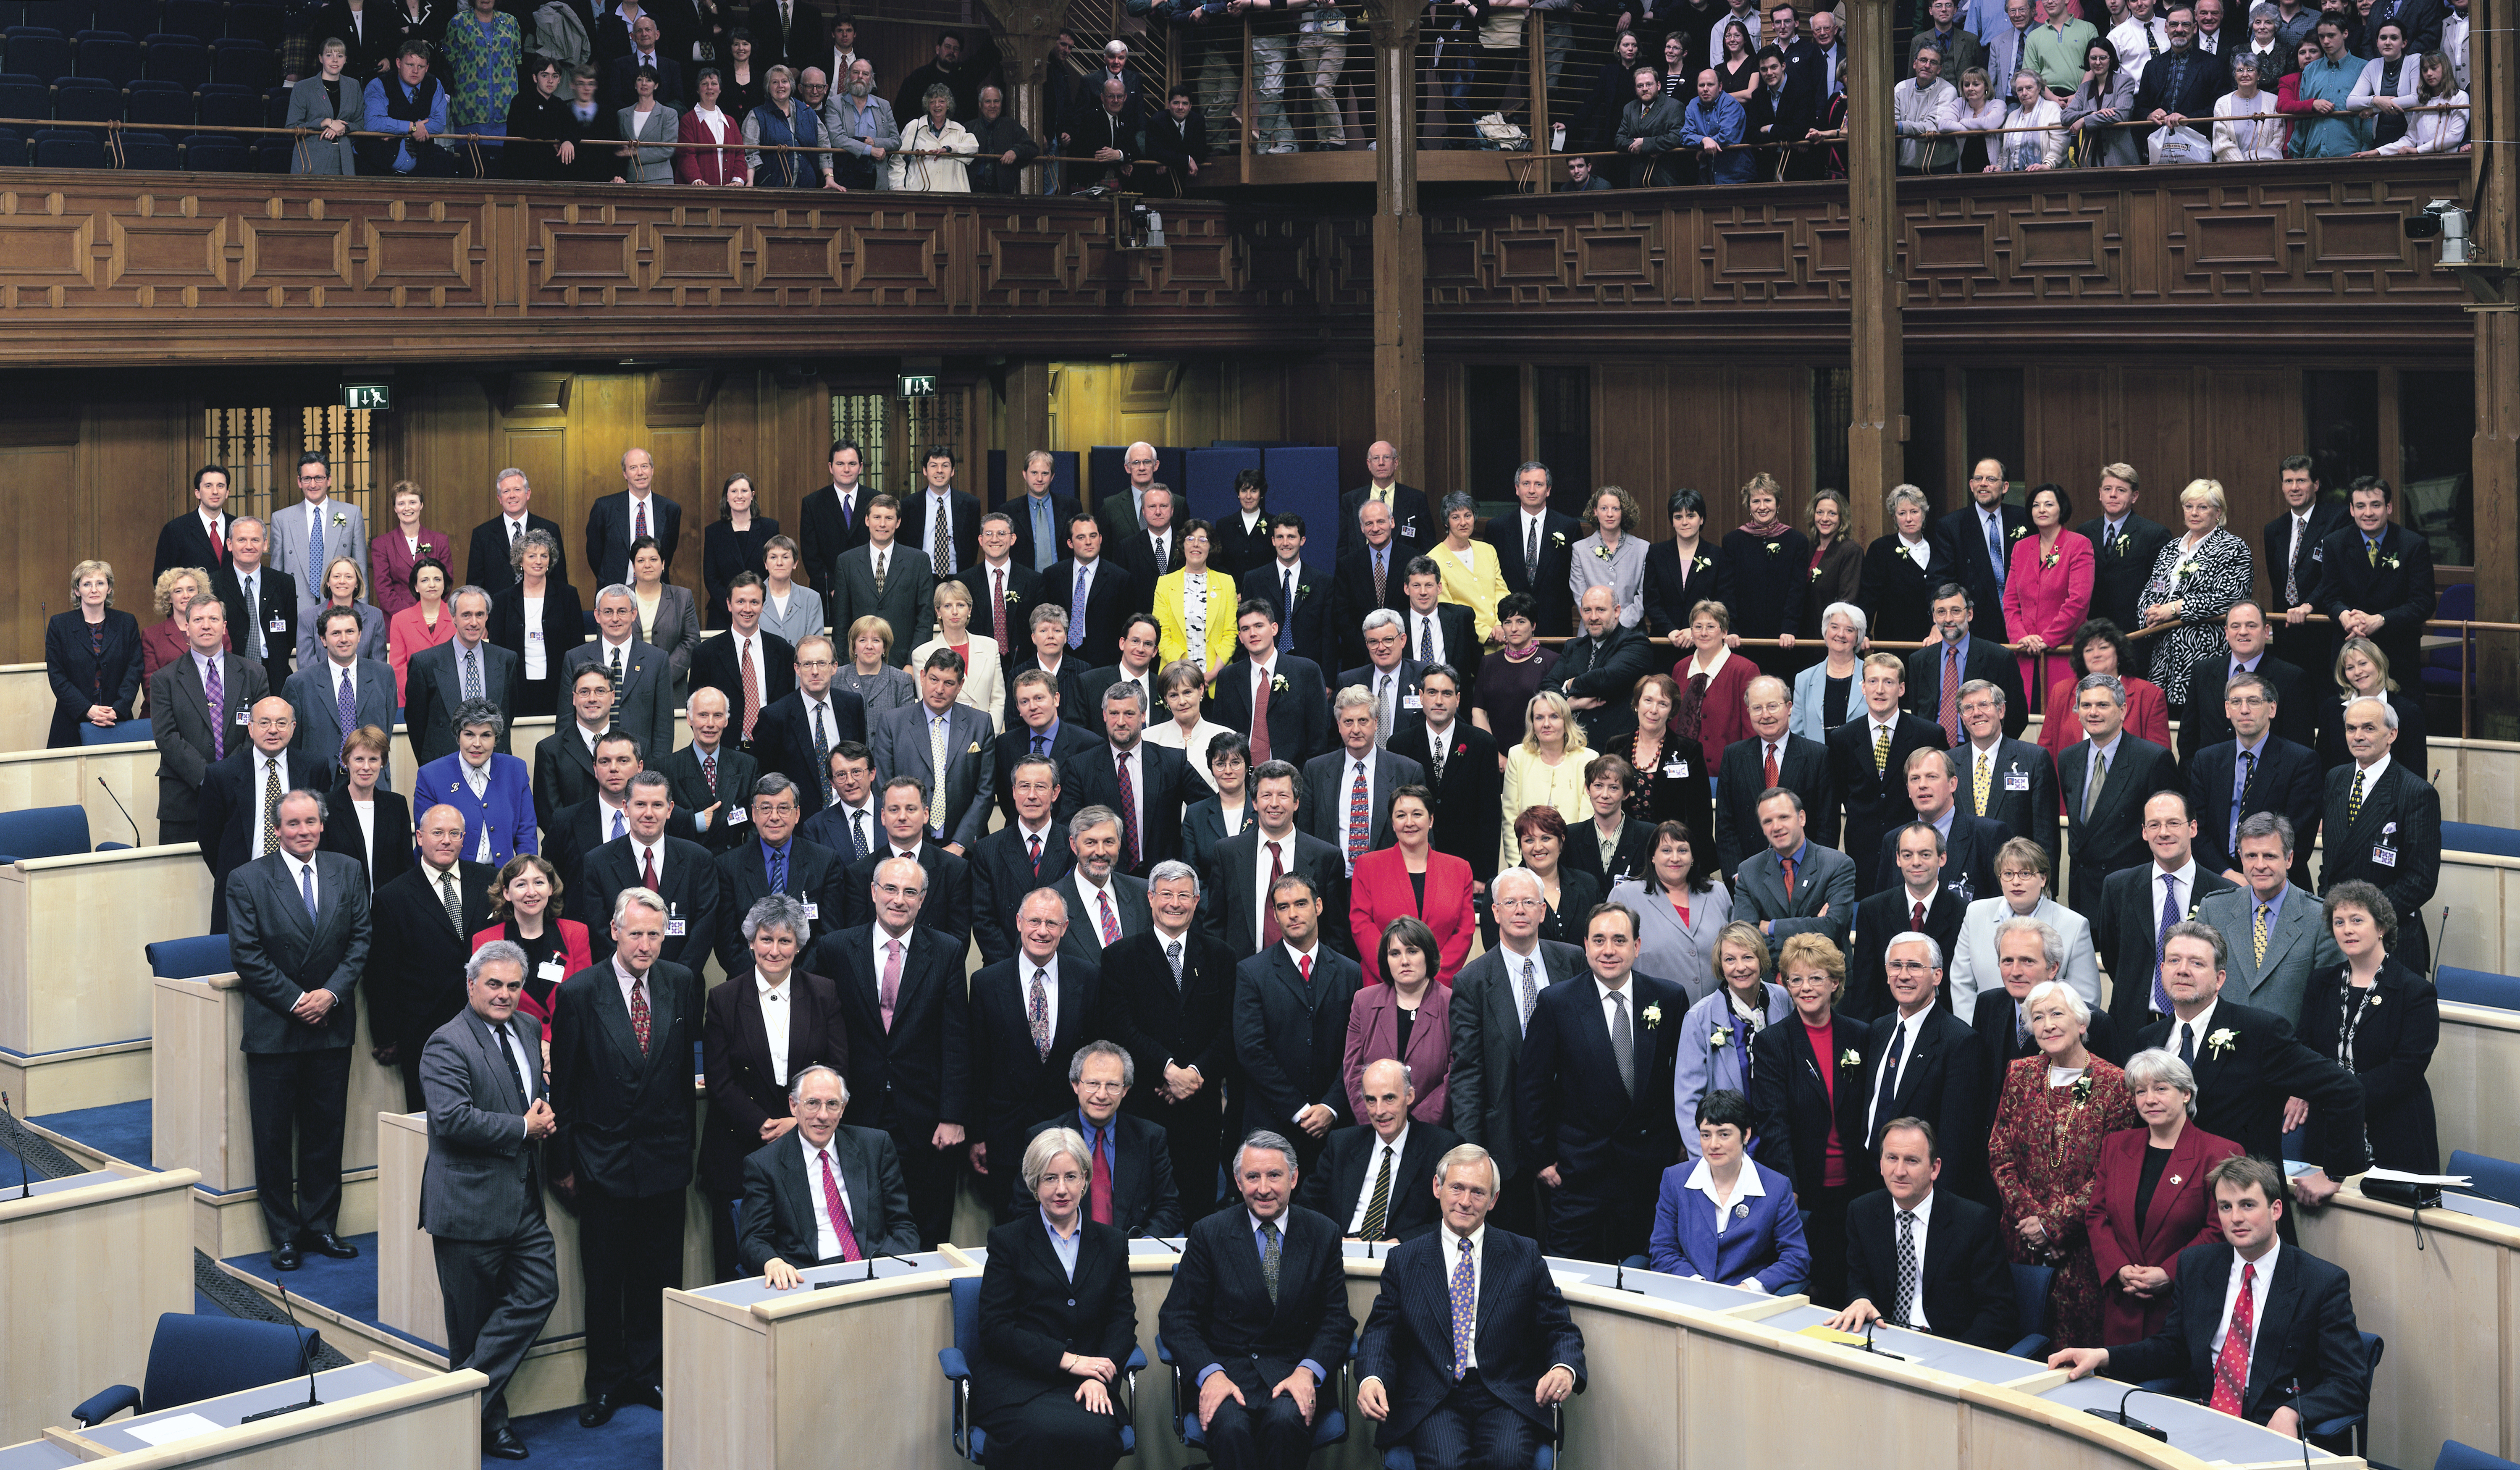 The 129 members of first Scottish Parliament in three centuries gathered in the General Assembly Hall of the Church of Scotland on May 12, 1999